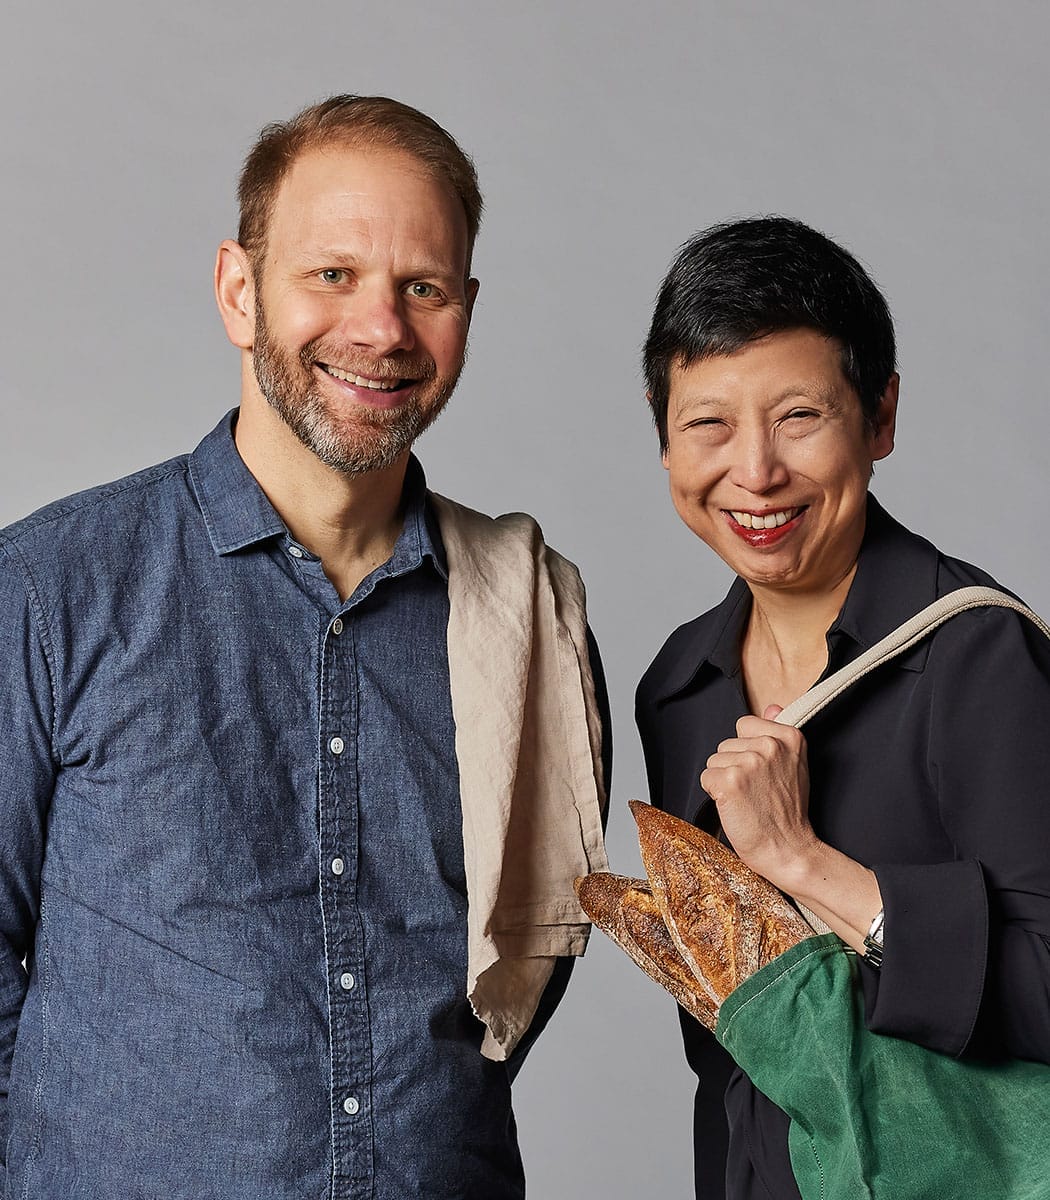 A man in a denim button-down shirt and a woman in a black button-down shirt pose together, a tan towel draped over one of the man's shoulders and a green bag with bread in it draped over one of the woman's shoulders.